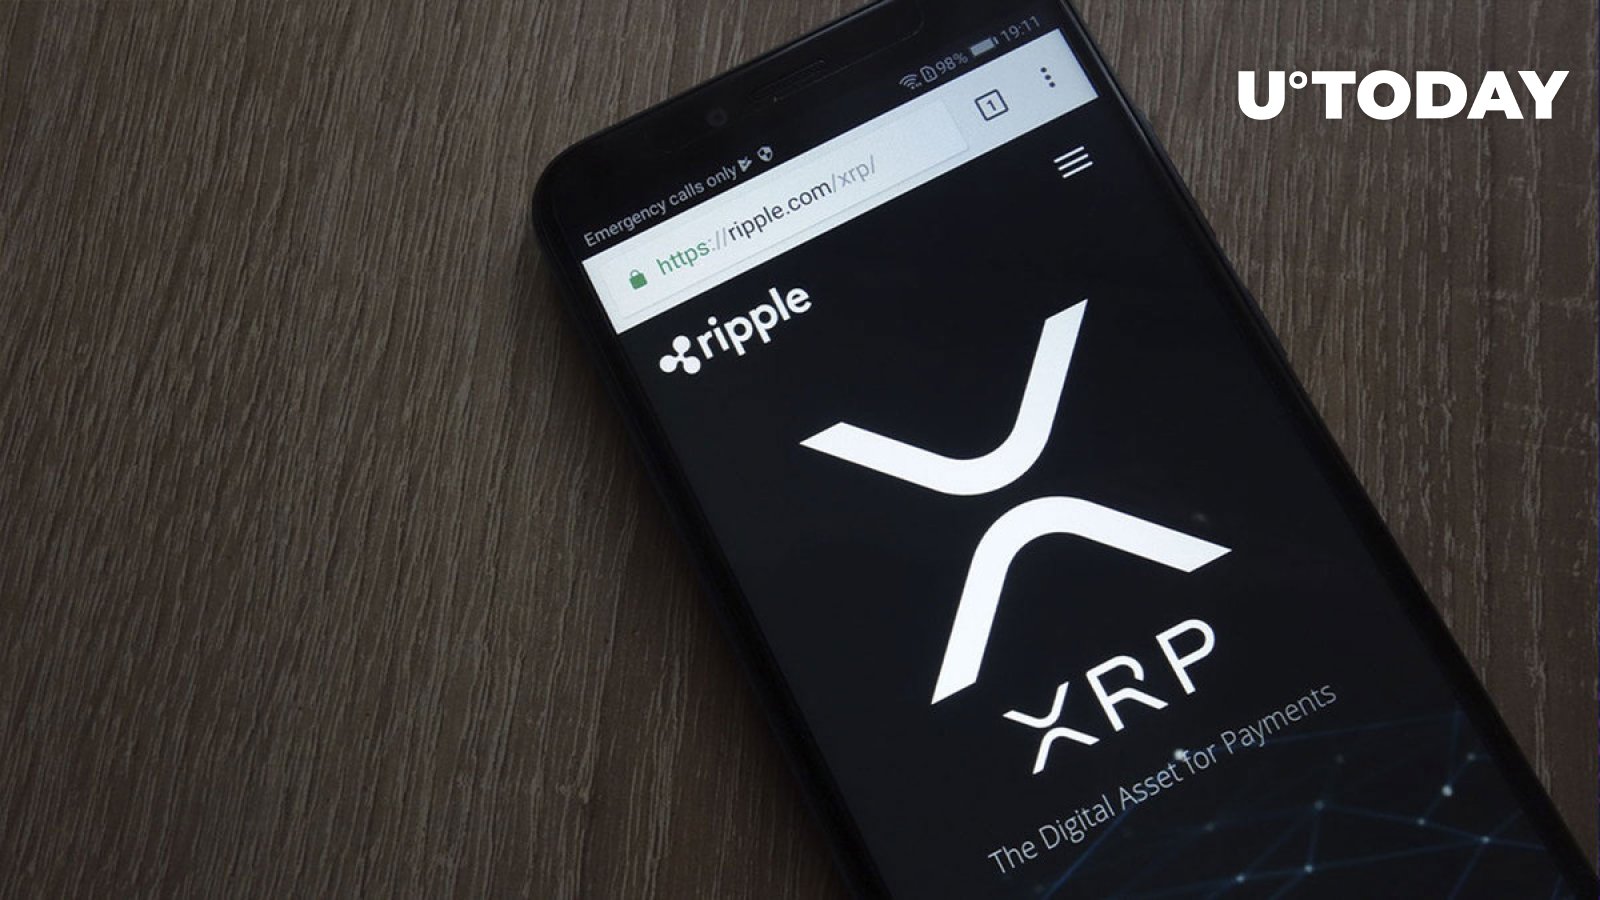 XRP Ripple Rich List and Crypto Market Update: What You Need to Know